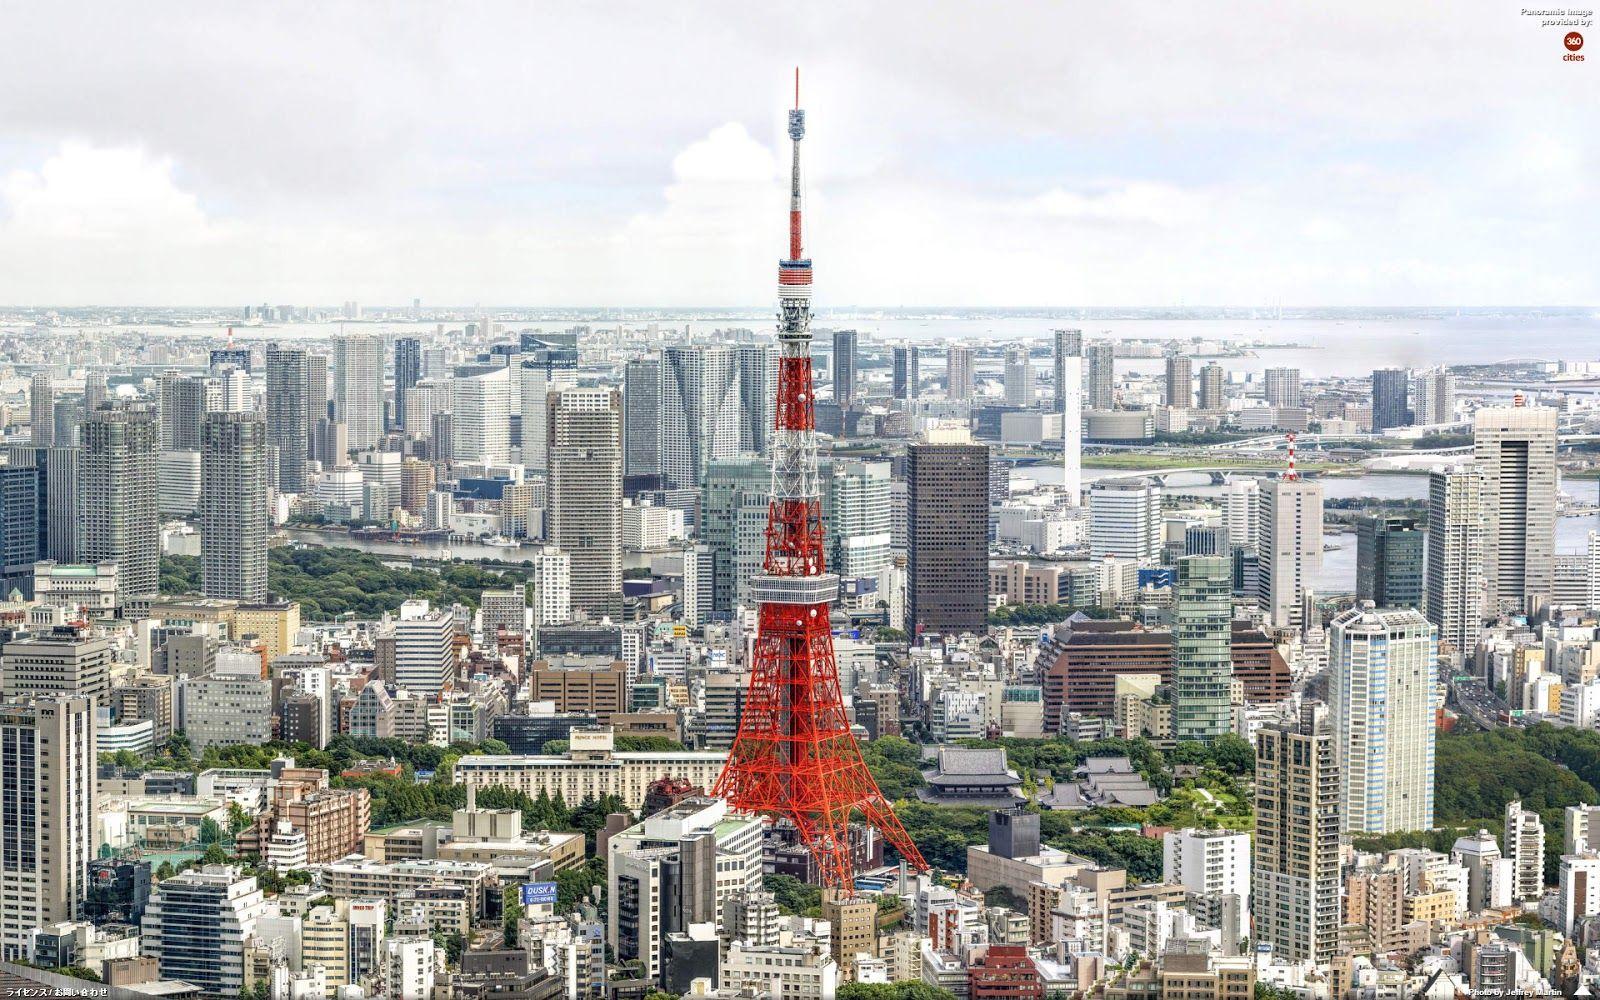 Tokyo Tower WQHD, QHD, 16:9 Wallpapers, HD Tokyo Tower 2560x1440 Backgrounds,  Free Images Download